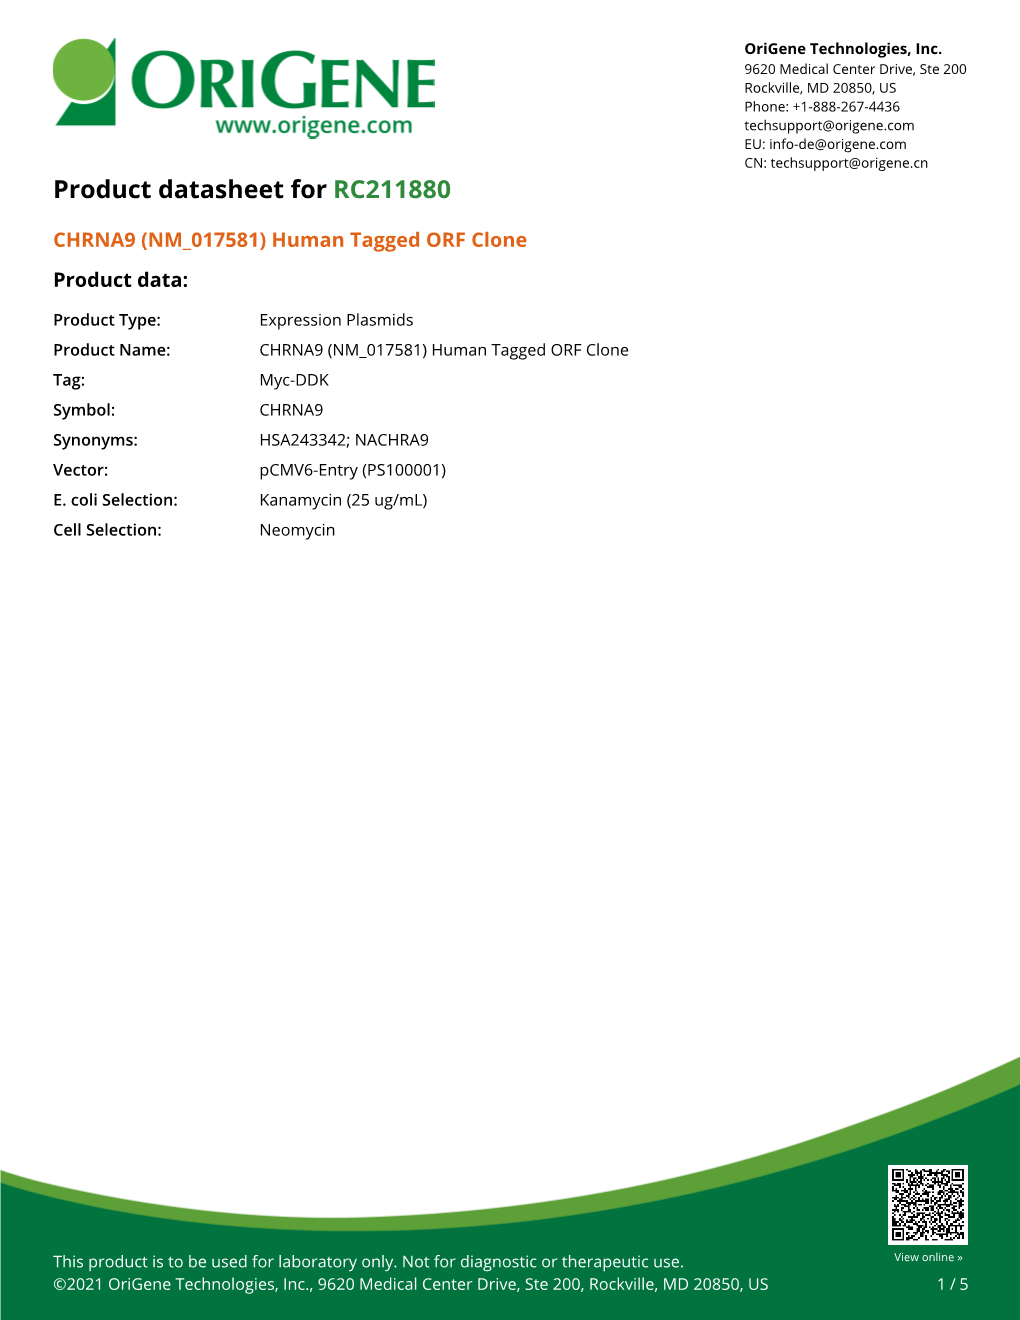 CHRNA9 (NM 017581) Human Tagged ORF Clone Product Data